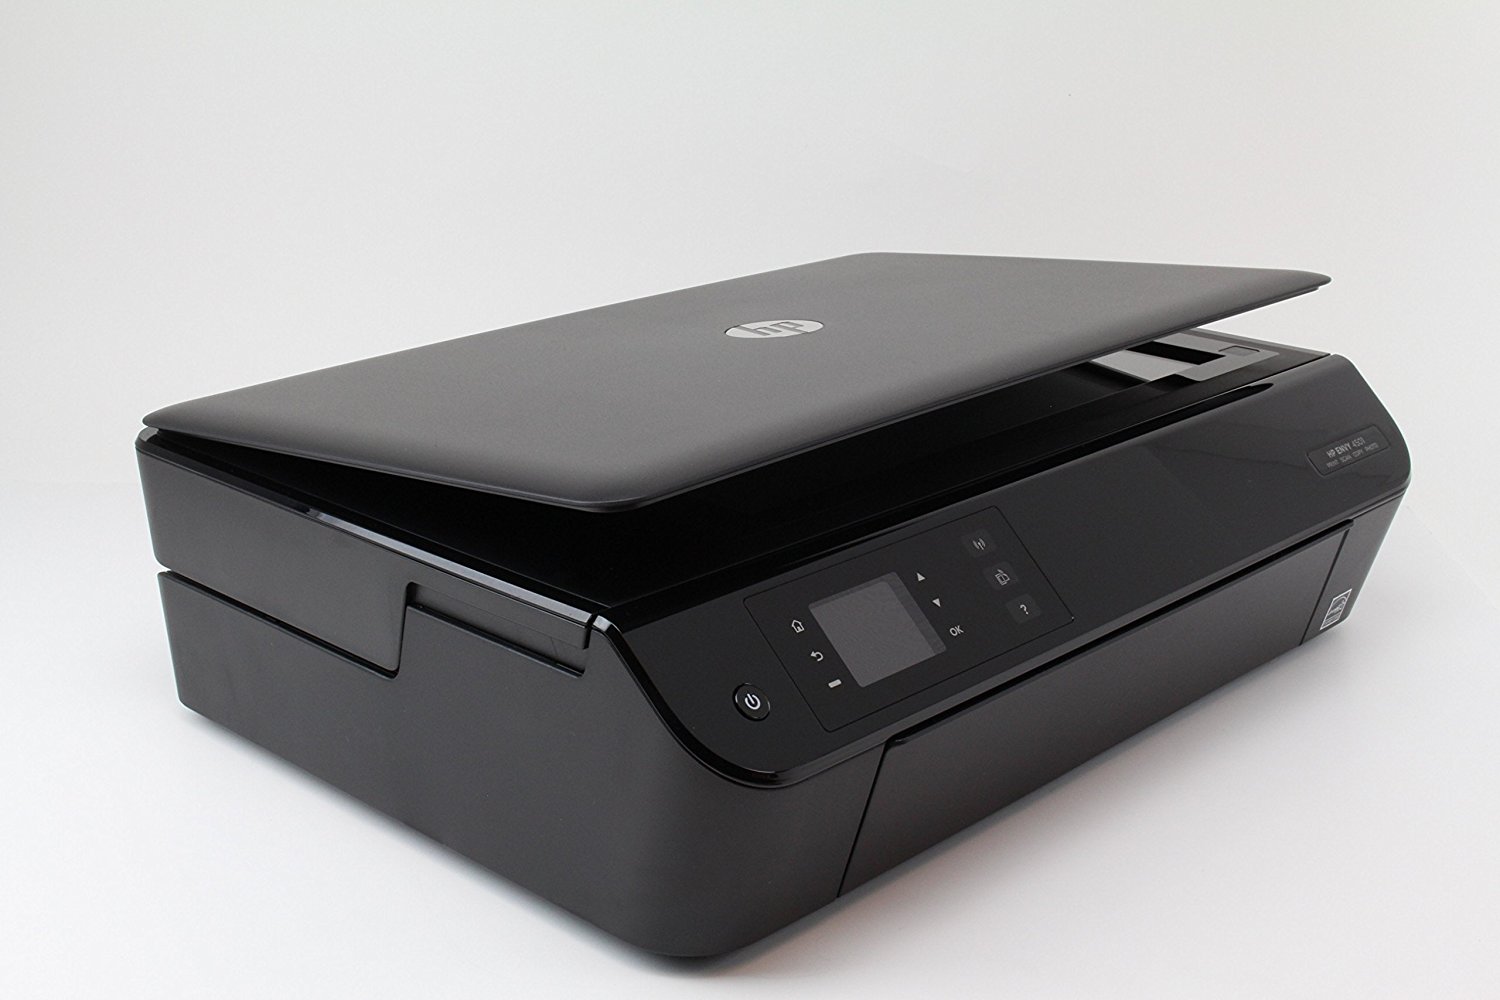 Hp Envy 4501 E All In One Inkjet Printer N3 Free Image Download 2115